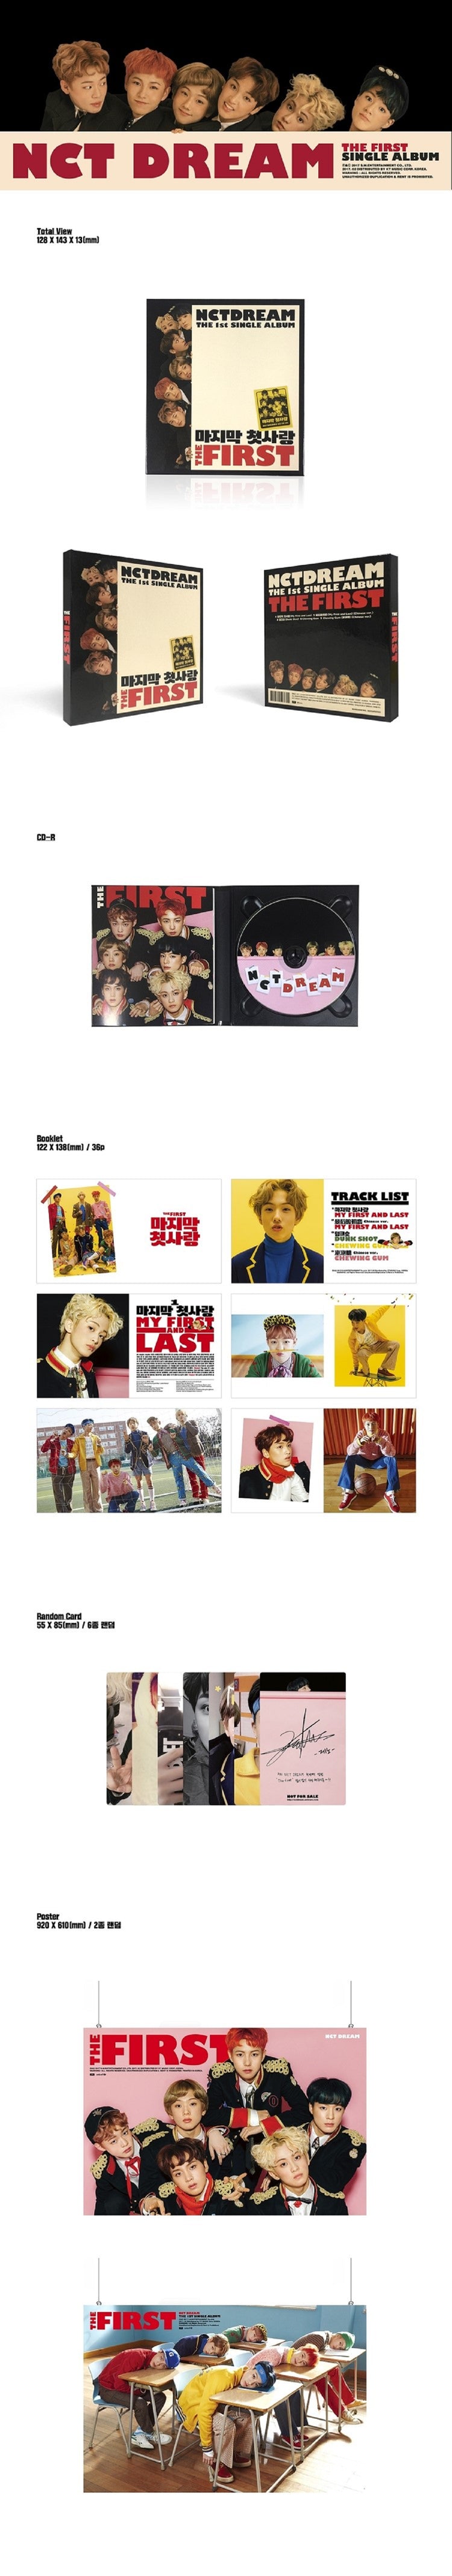 [NCT DREAM] 1st Single Album [THE FIRST] contents